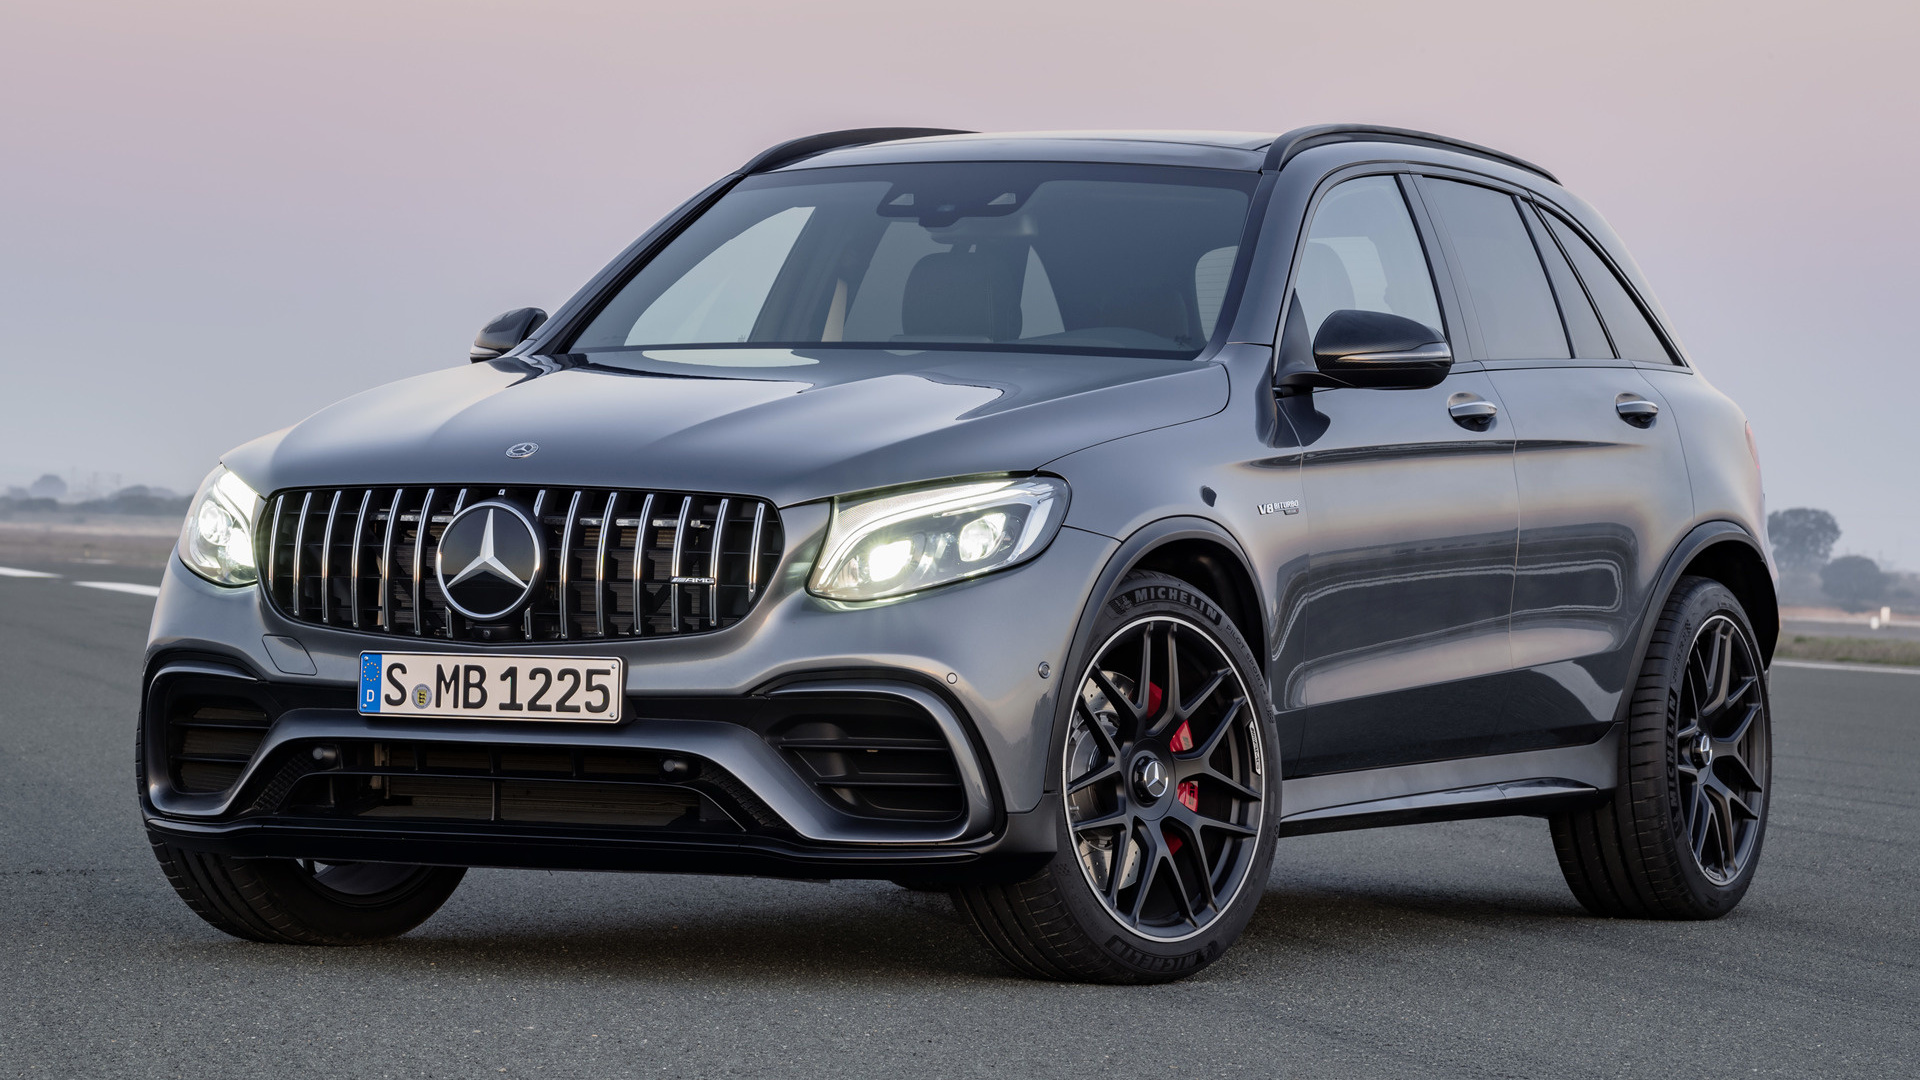 2017 Mercedes-AMG GLC 63 S - Wallpapers and HD Images | Car Pixel